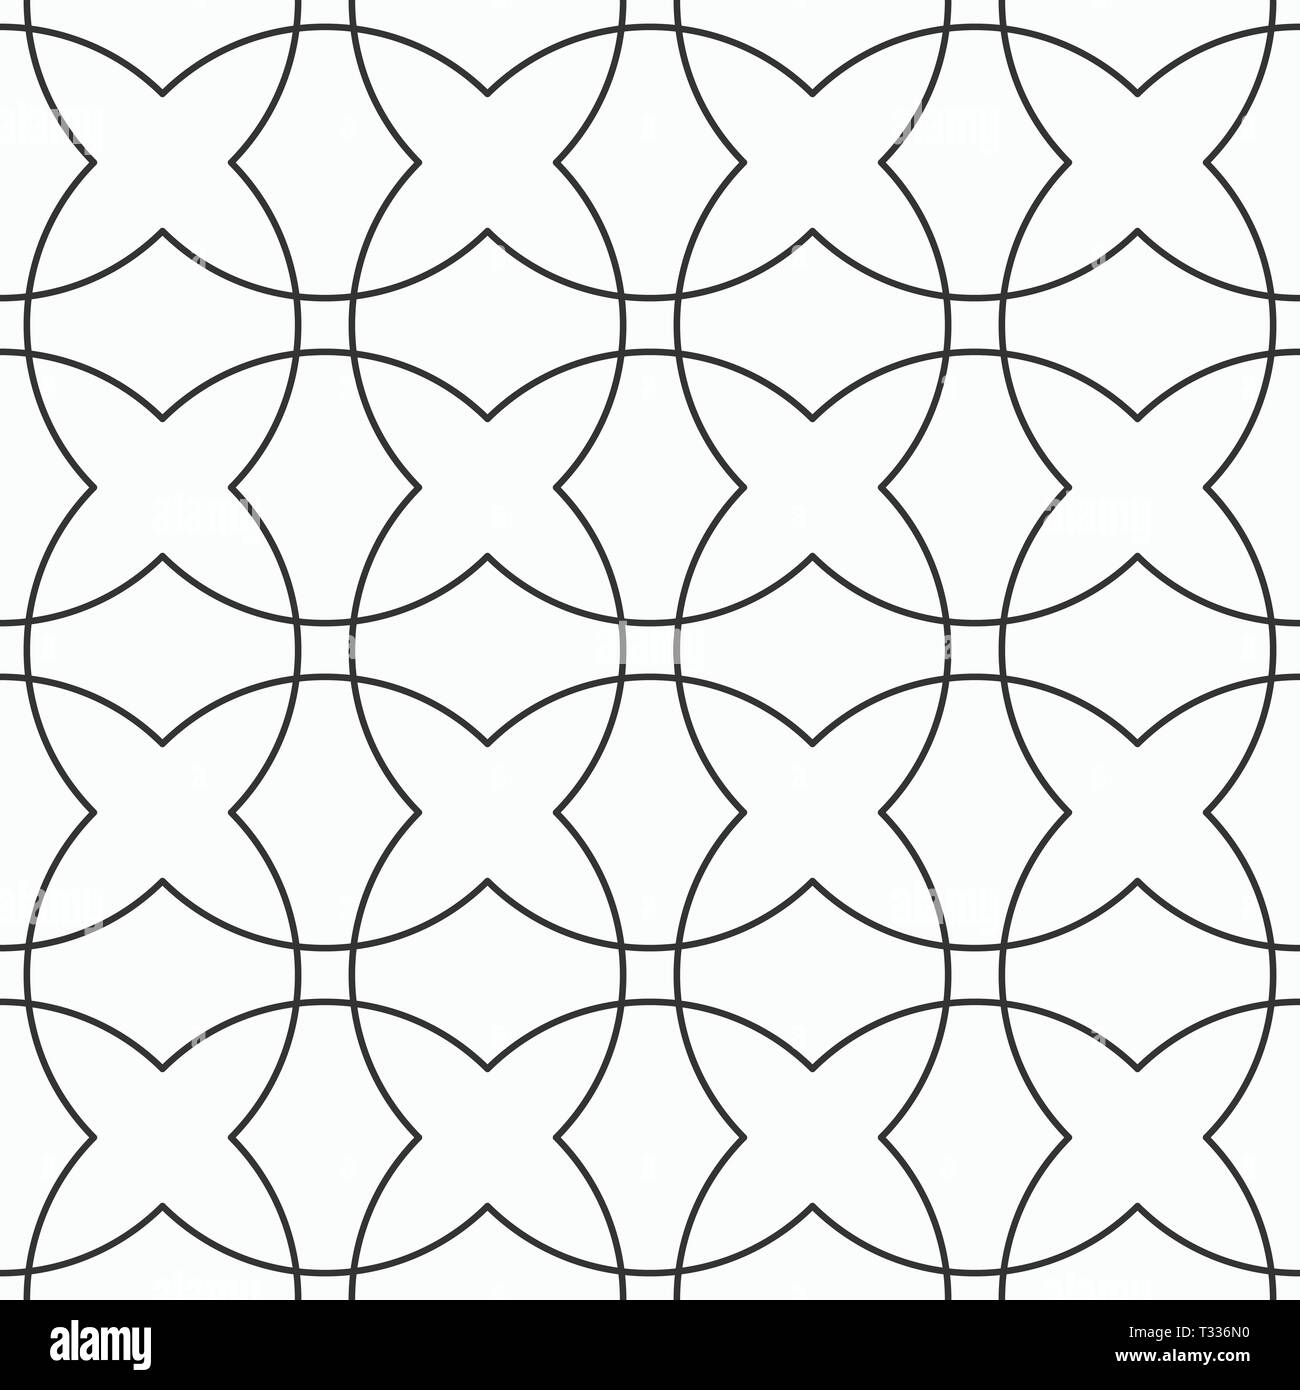 Abstract seamless pattern of intersecting curved lines. Linear style ...